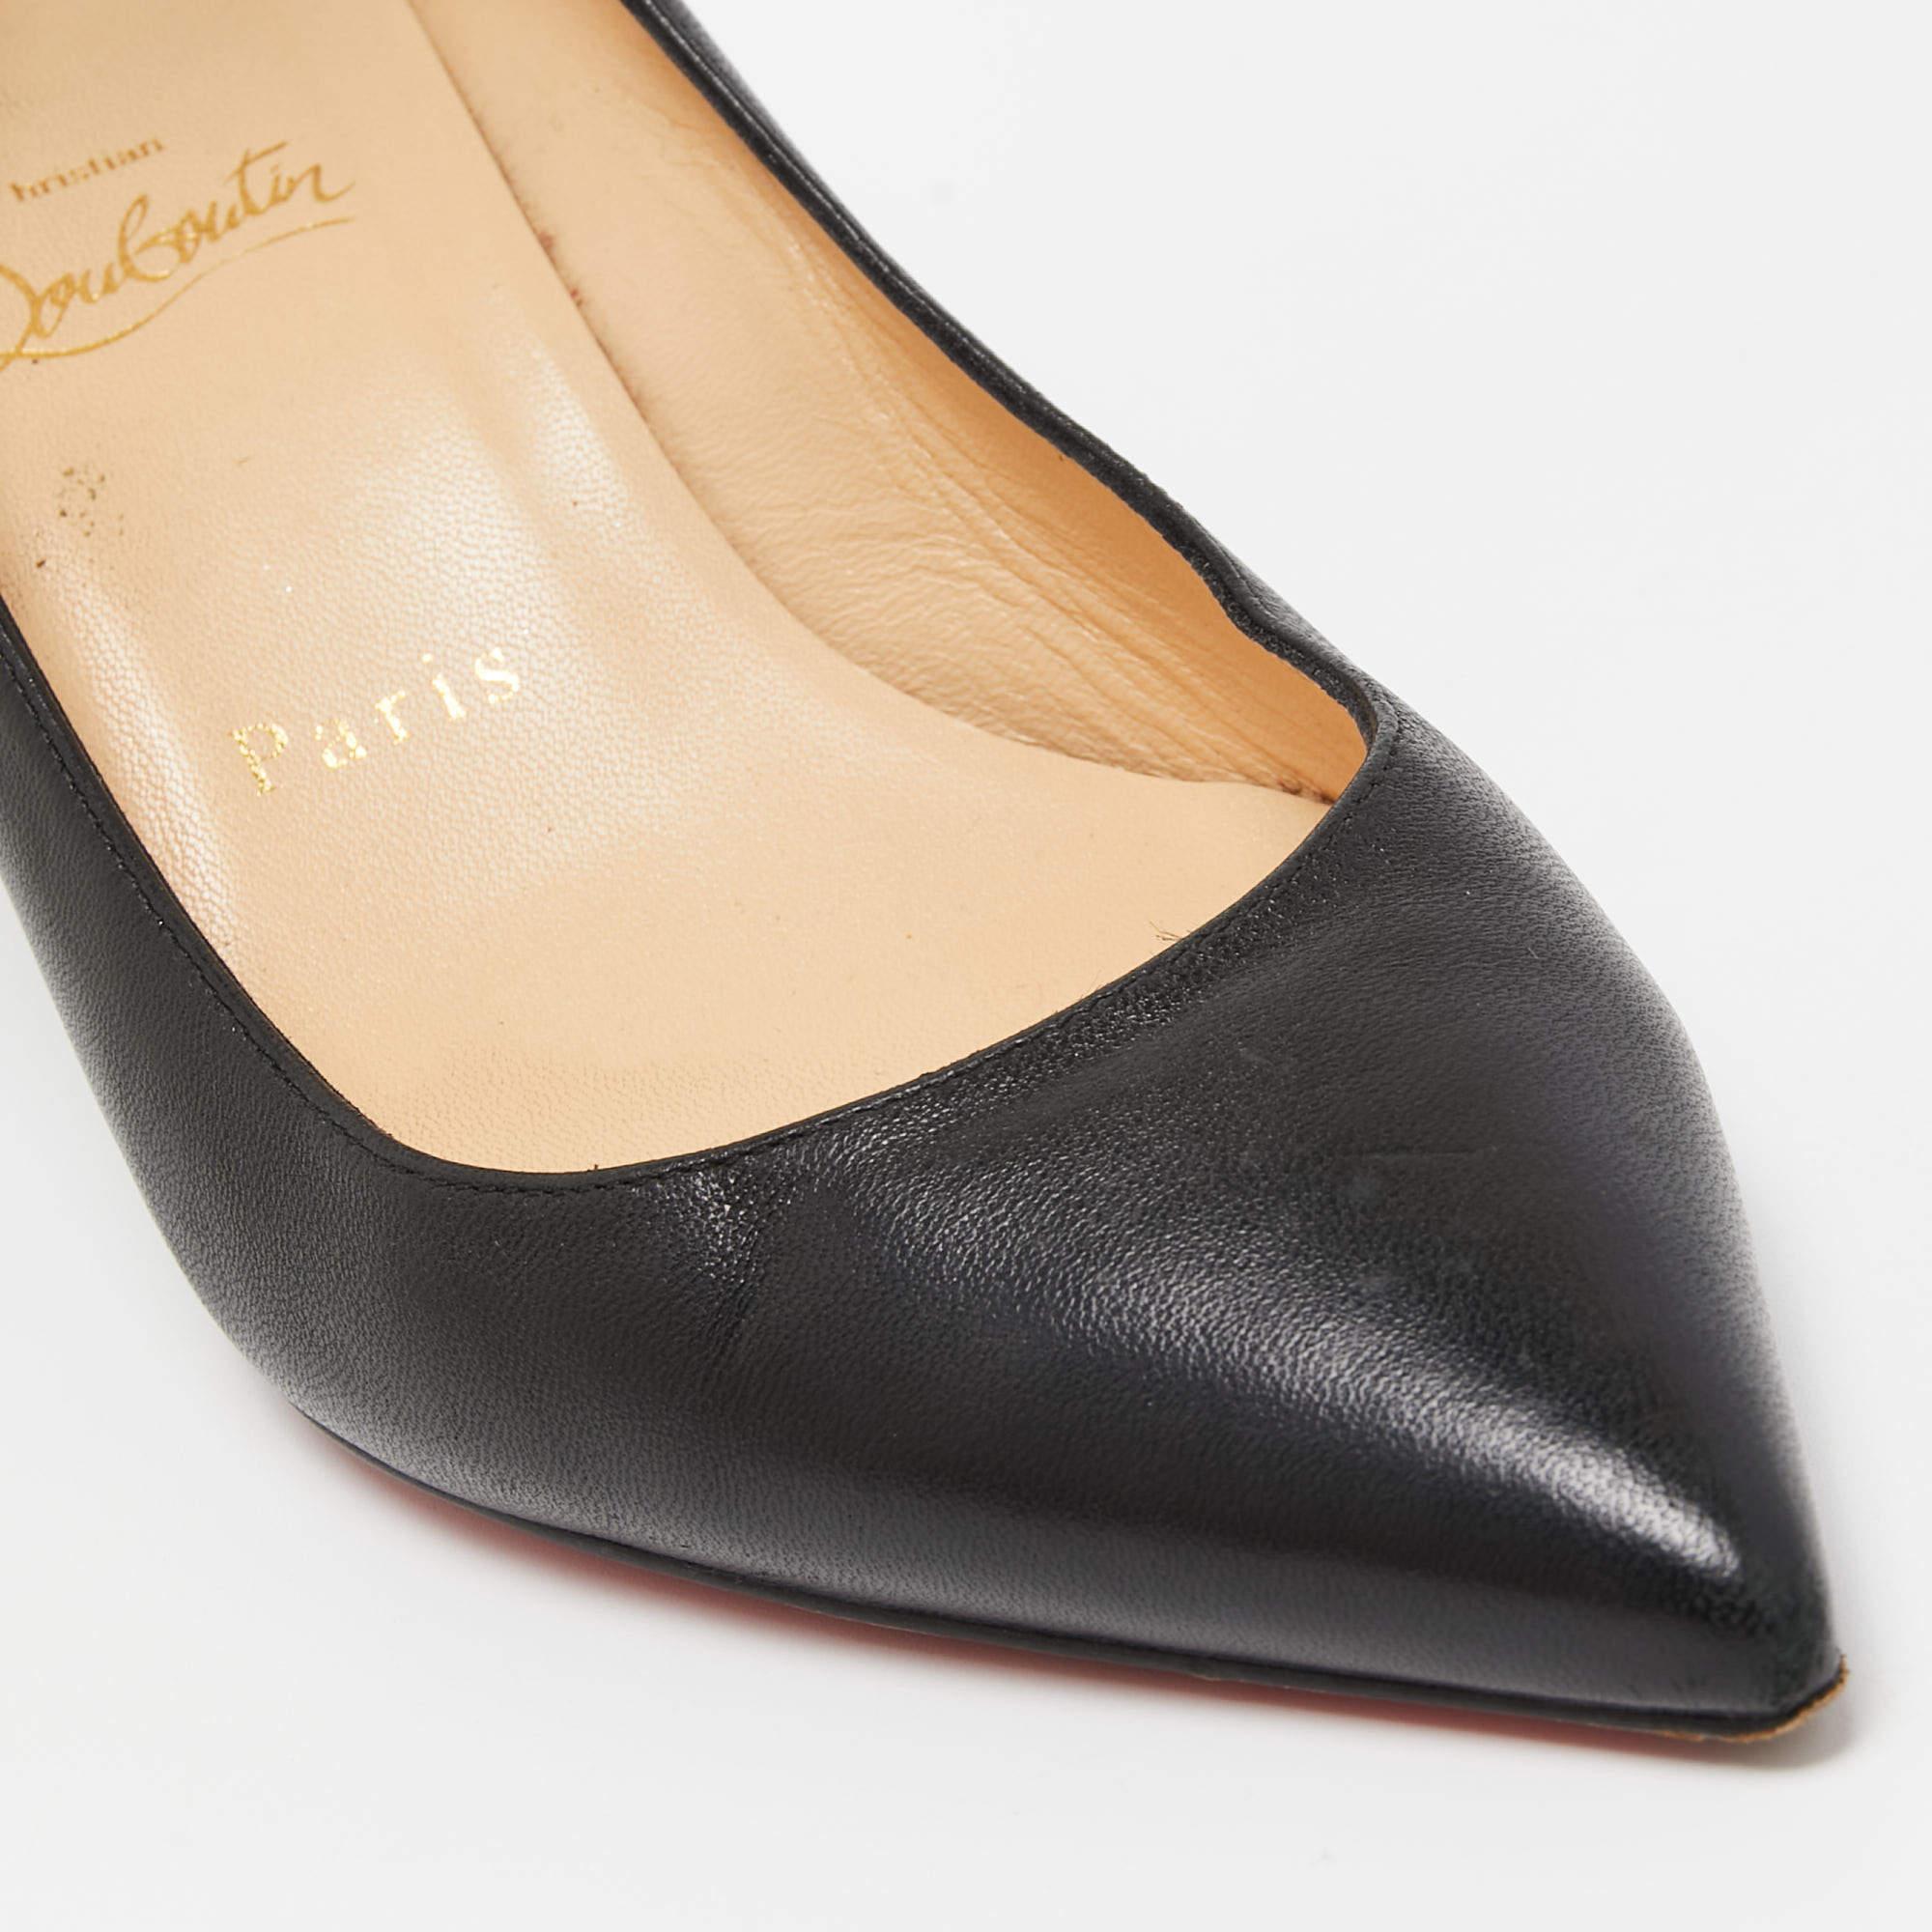 Christian Louboutin Black Leather Pointed Toe Wedge Pumps Size 37.5 For Sale 2